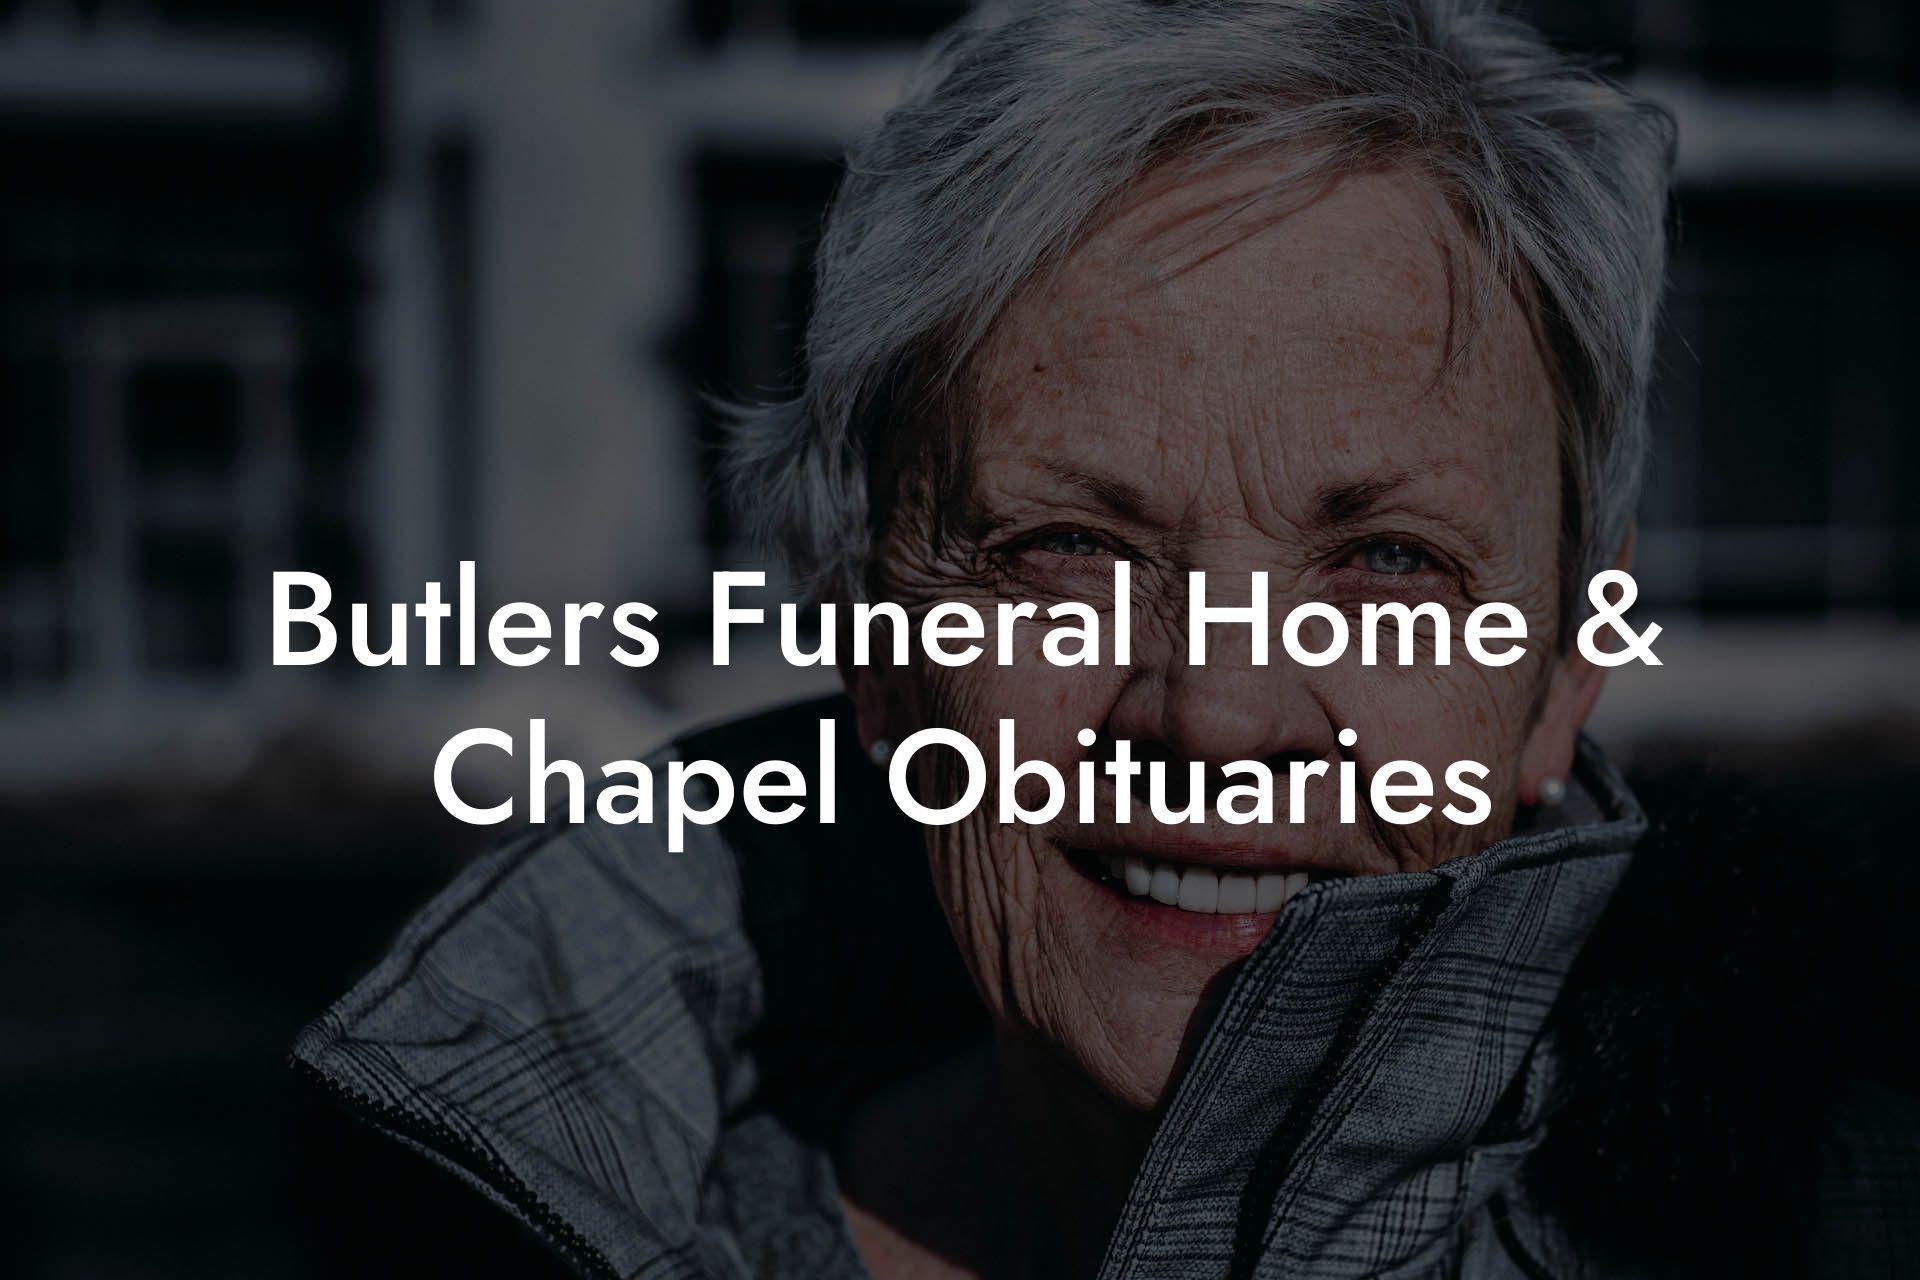 Butlers Funeral Home & Chapel Obituaries